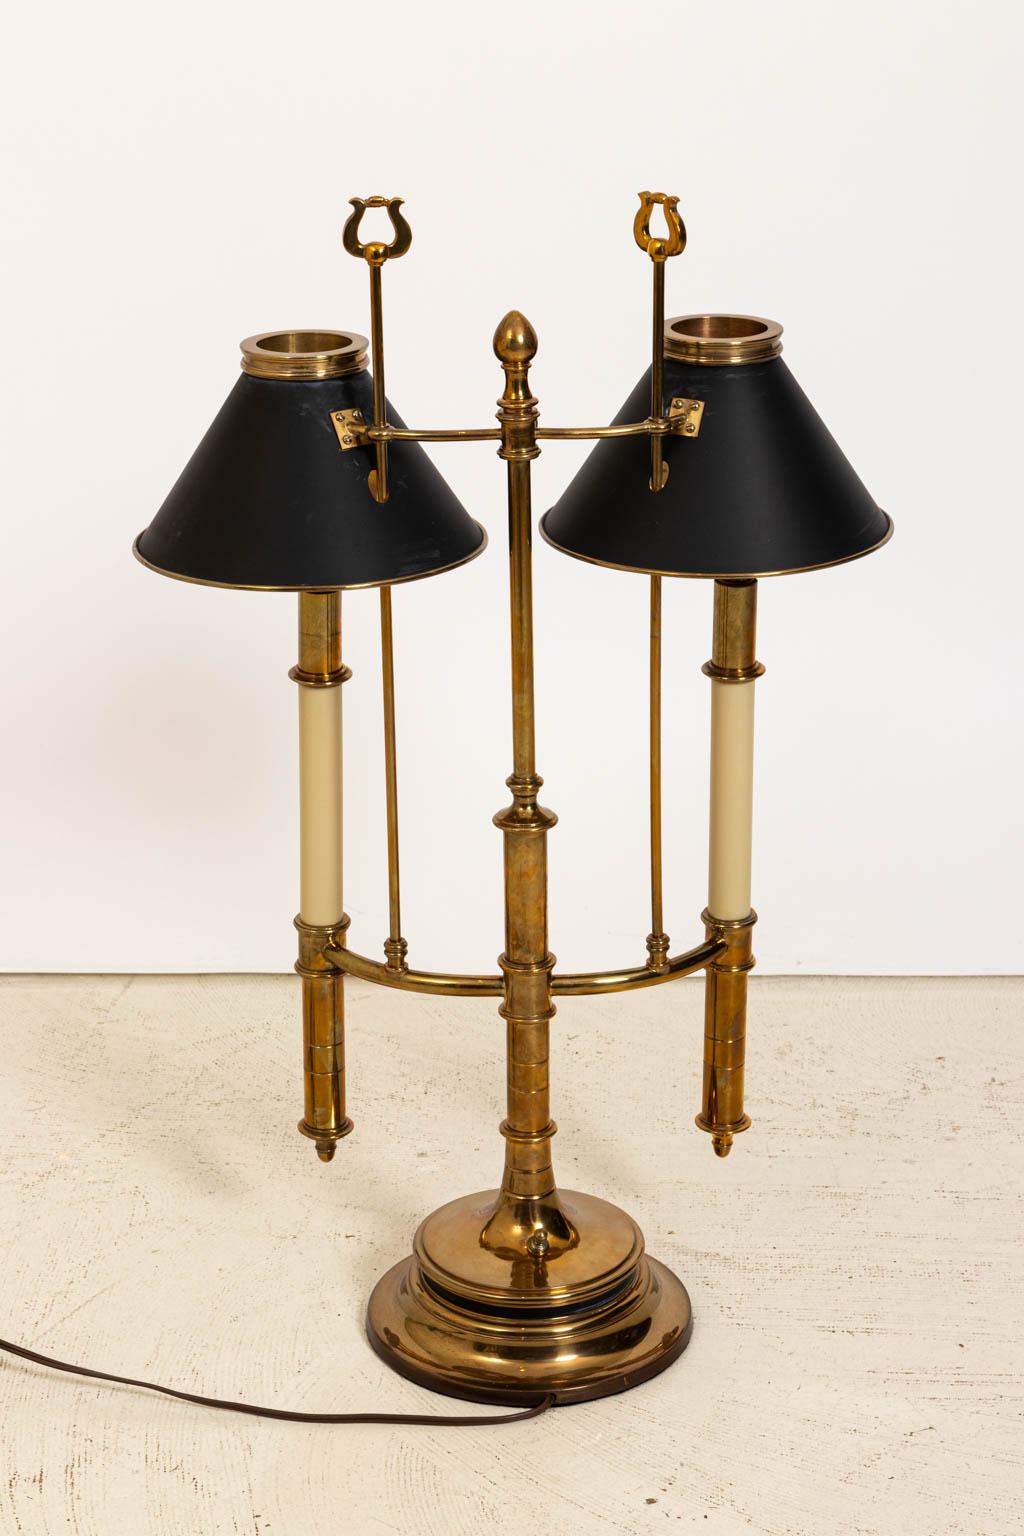 Edwardian style double light brass desk lamp with black tole shades circa 20th century. Shades not included. Made in the United States. Please note of wear consistent with age including minor oxidation and patina. The base of the lamp measures 8.00